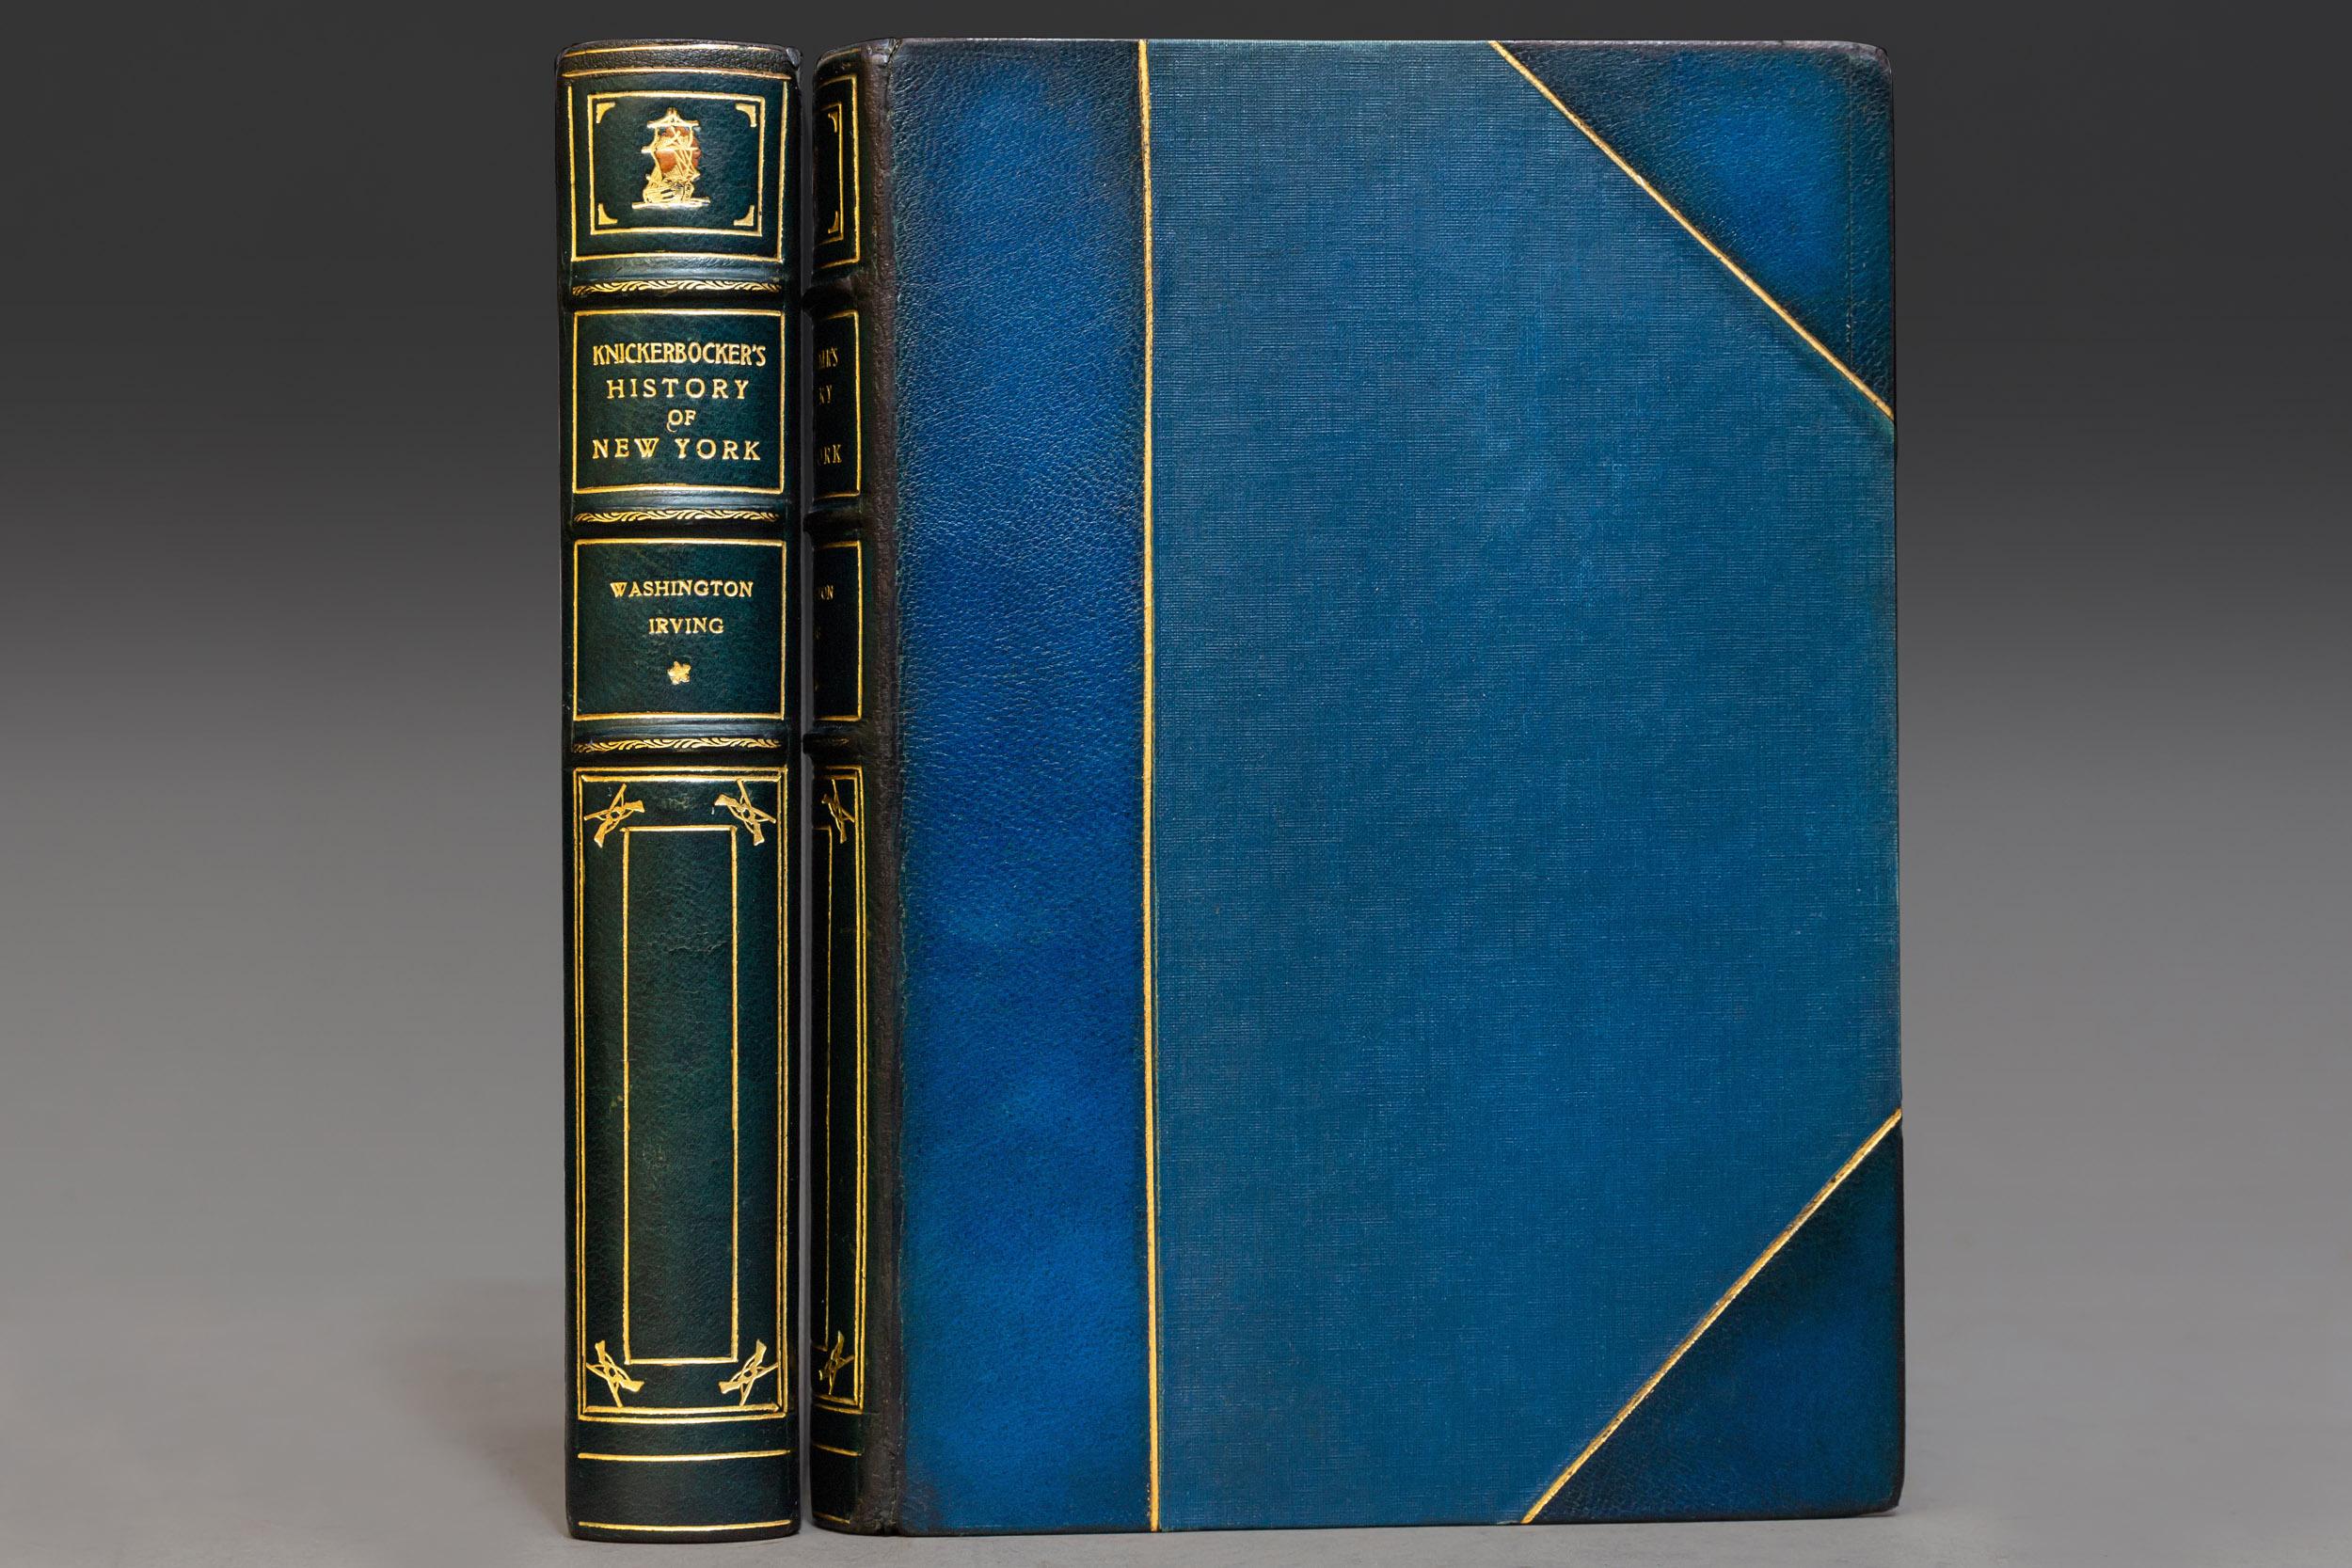 2 Volumes. “Van Twiller Edition” with illustrations by Edward W. Kemble. Bound in 3/4 blue Morocco, cloth boards, top edges gilt, raised bands, gilt panels, marbled
Endpapers. Published: New York: G.P. Putnam’s Sons 1894. 

Dimensions: H 9”, D 6